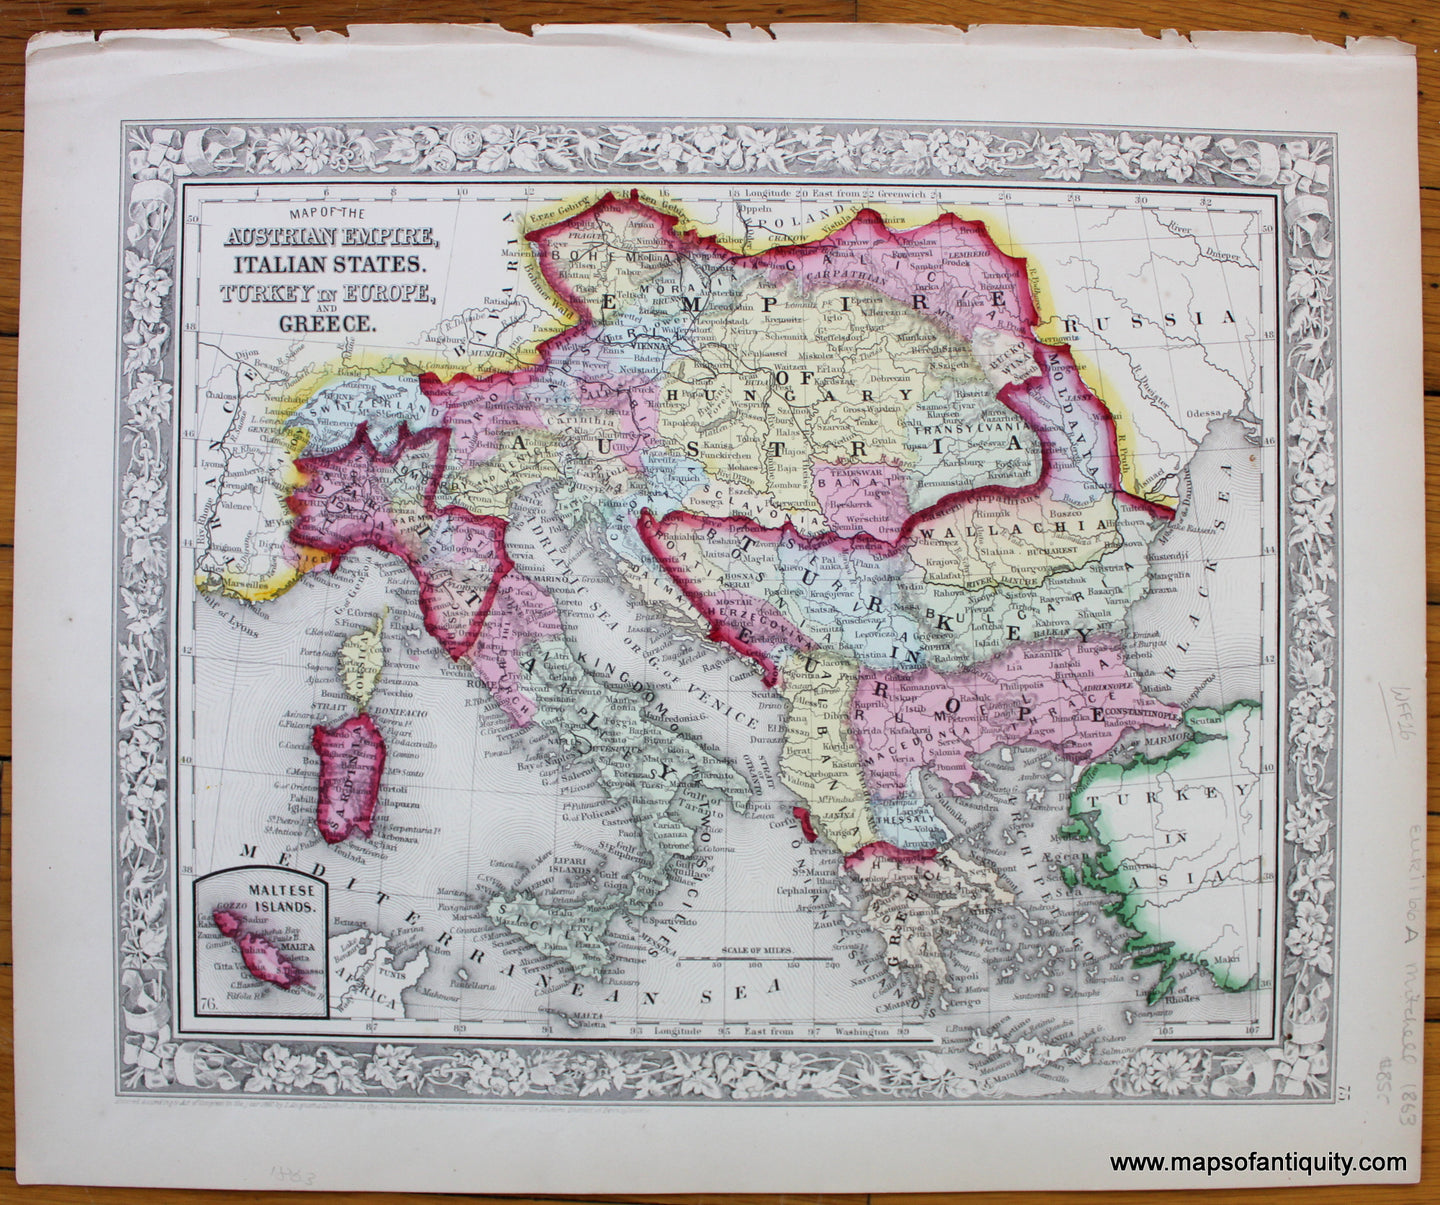 Antique-Hand-Colored-Map-Map-of-the-Austrian-Empire-Italian-States-Turkey-in-Europe-and-Greece-with-inset-of-the-Maltese-Islands.--Europe-Europe-General-1860-Mitchell-Maps-Of-Antiquity